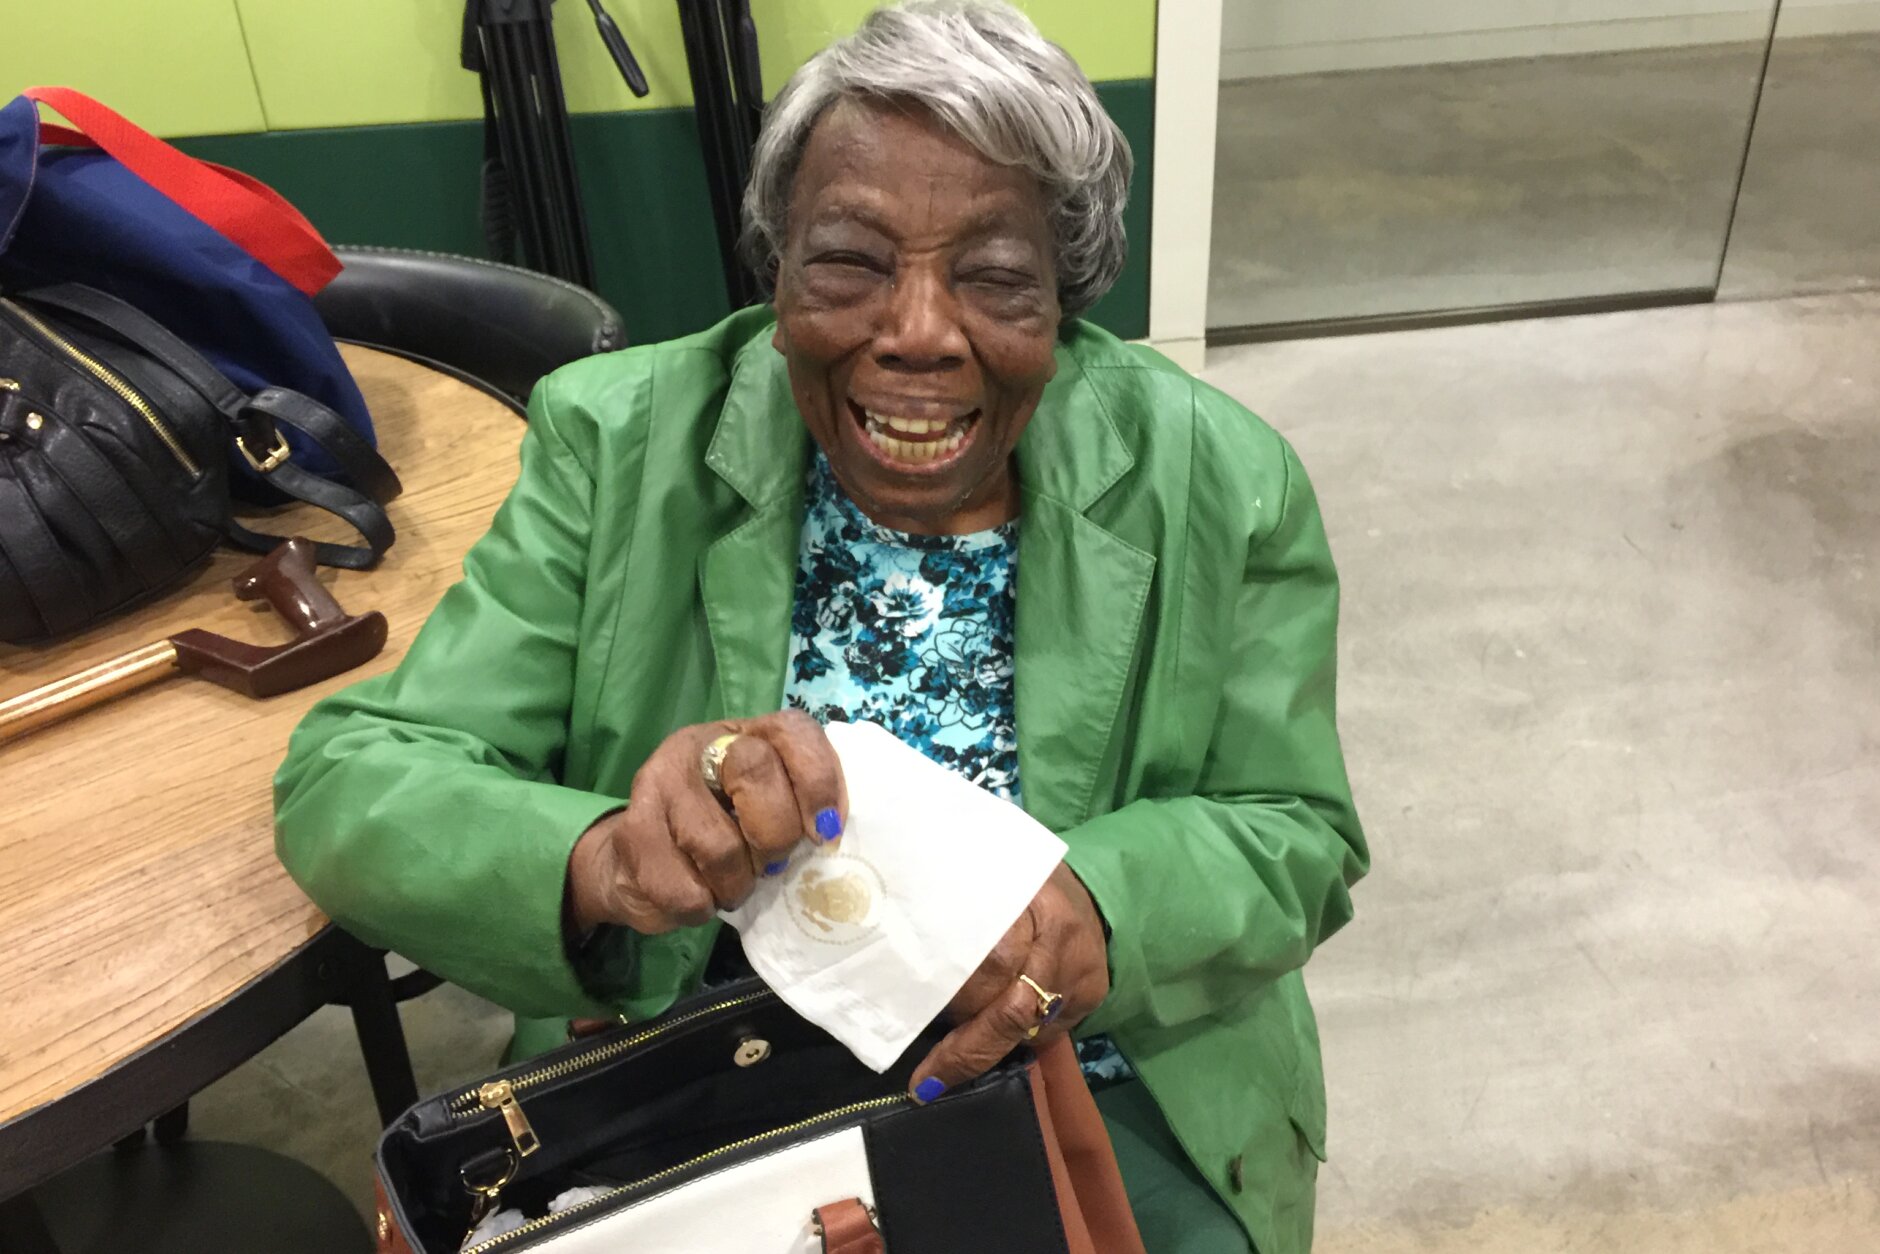 Virginia McLaurin displays the White House napkin she got when meeting President Obama and the First Lady. Video of the 106-year-old dancing with the first couple garnered (at publication) 59,570,733 views on the White House Facebook page. (WTOP/Kristi King)